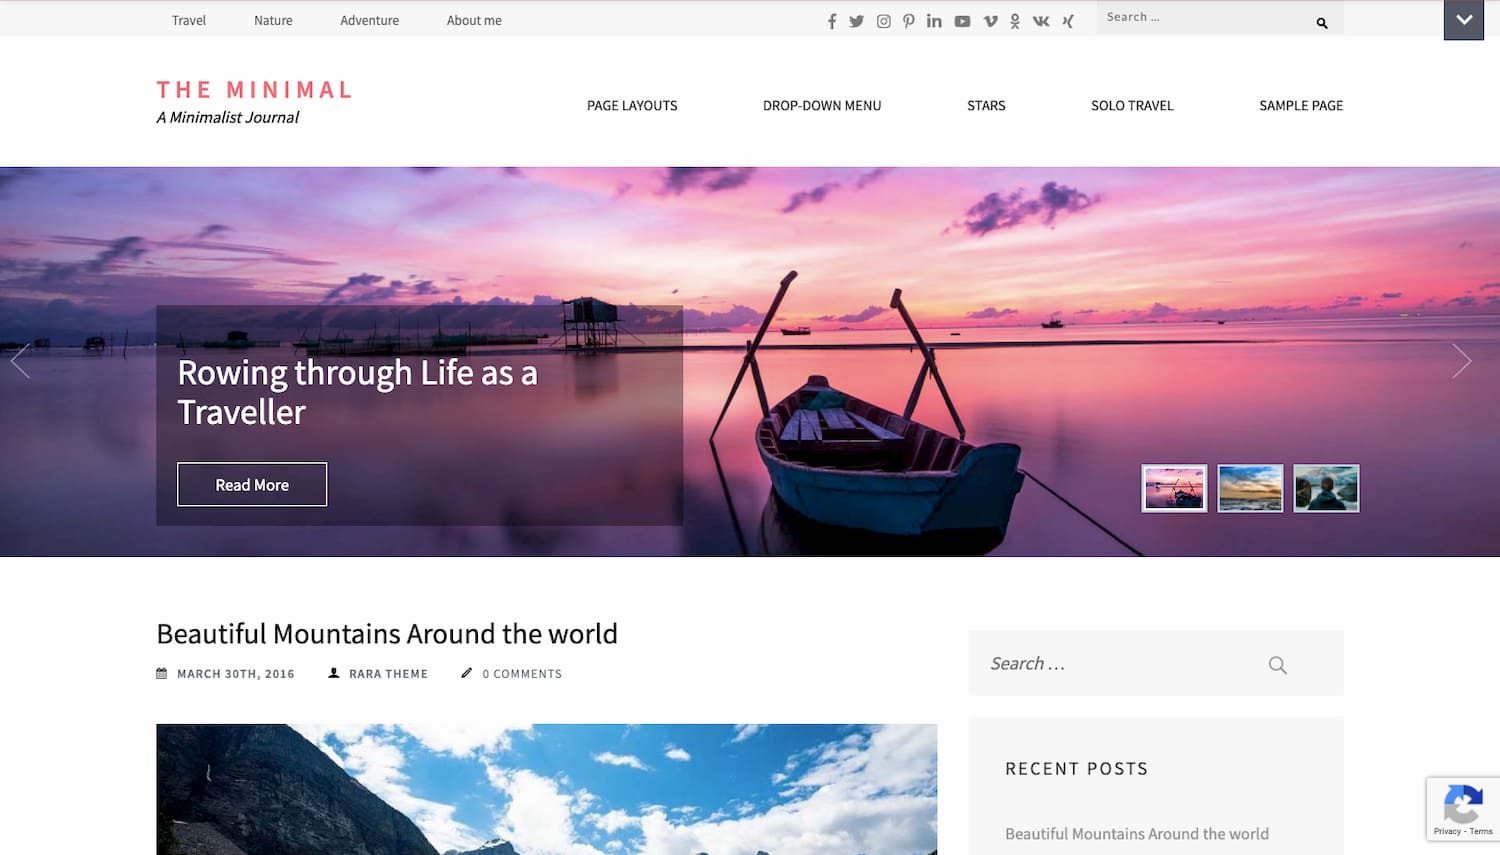 The Minimal WordPress theme demo has lots of images and white space